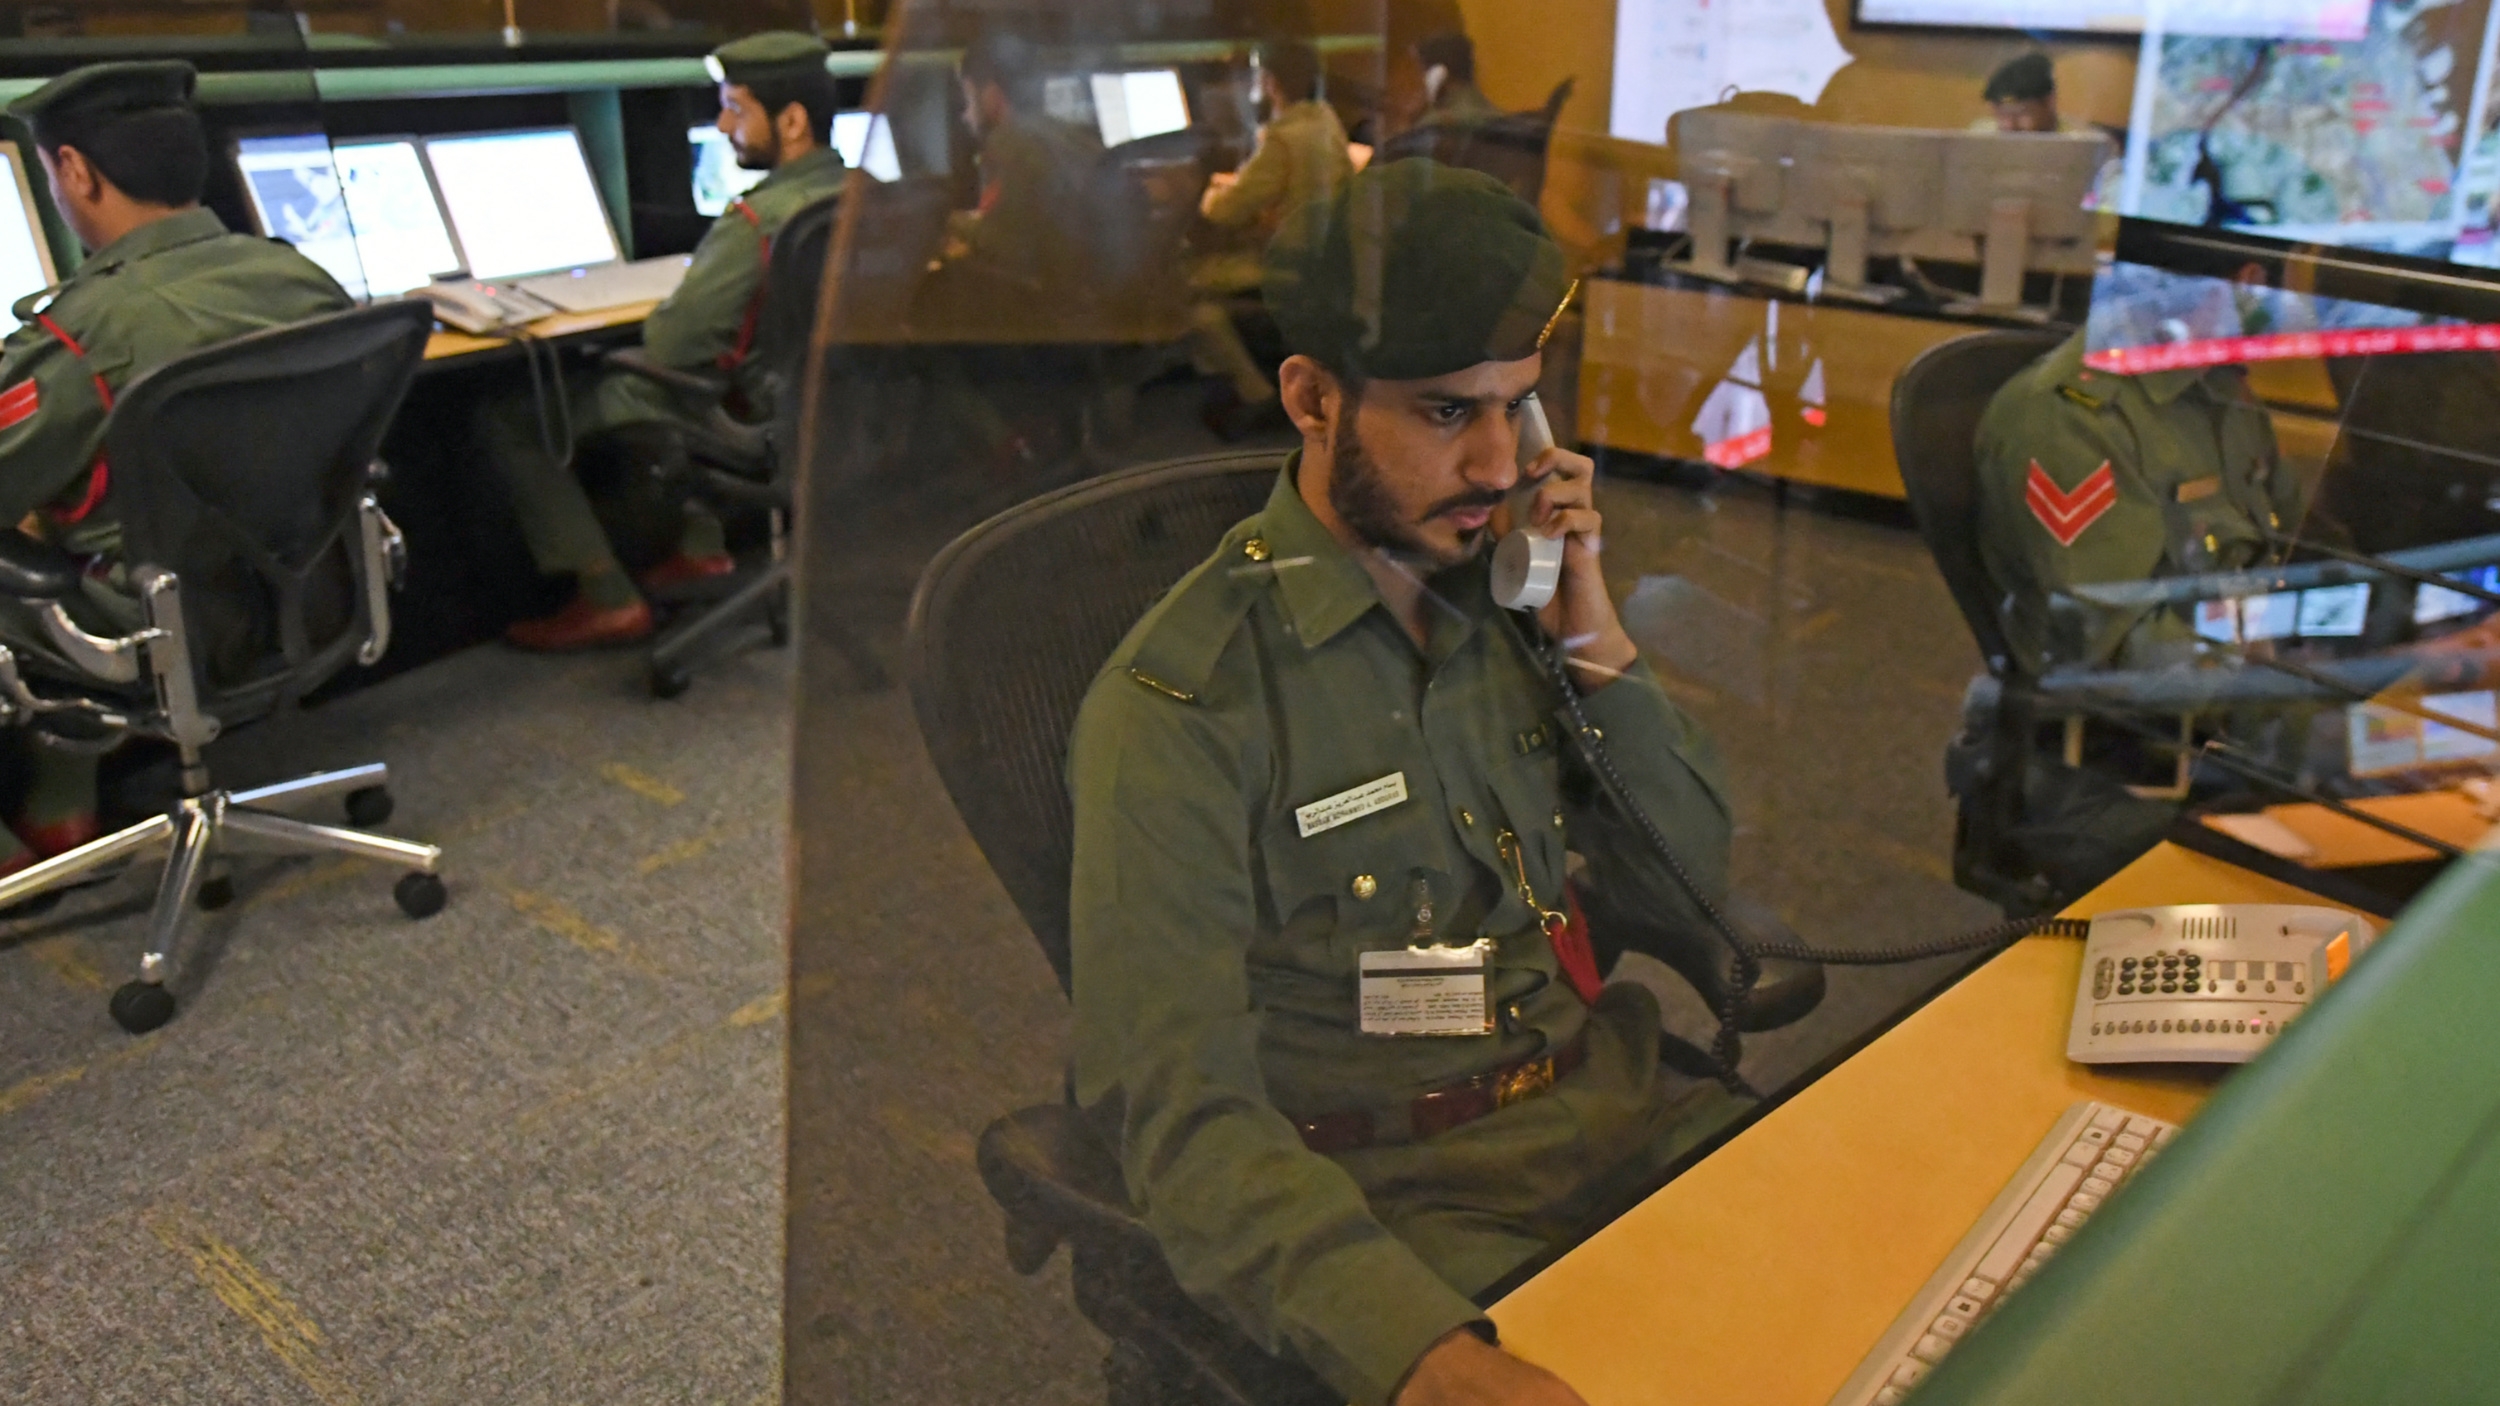 Police officers monitor the streets and receive calls from citizens at the Command and Control Center of Dubai Police in the Gulf emirate, on 24 February 2020